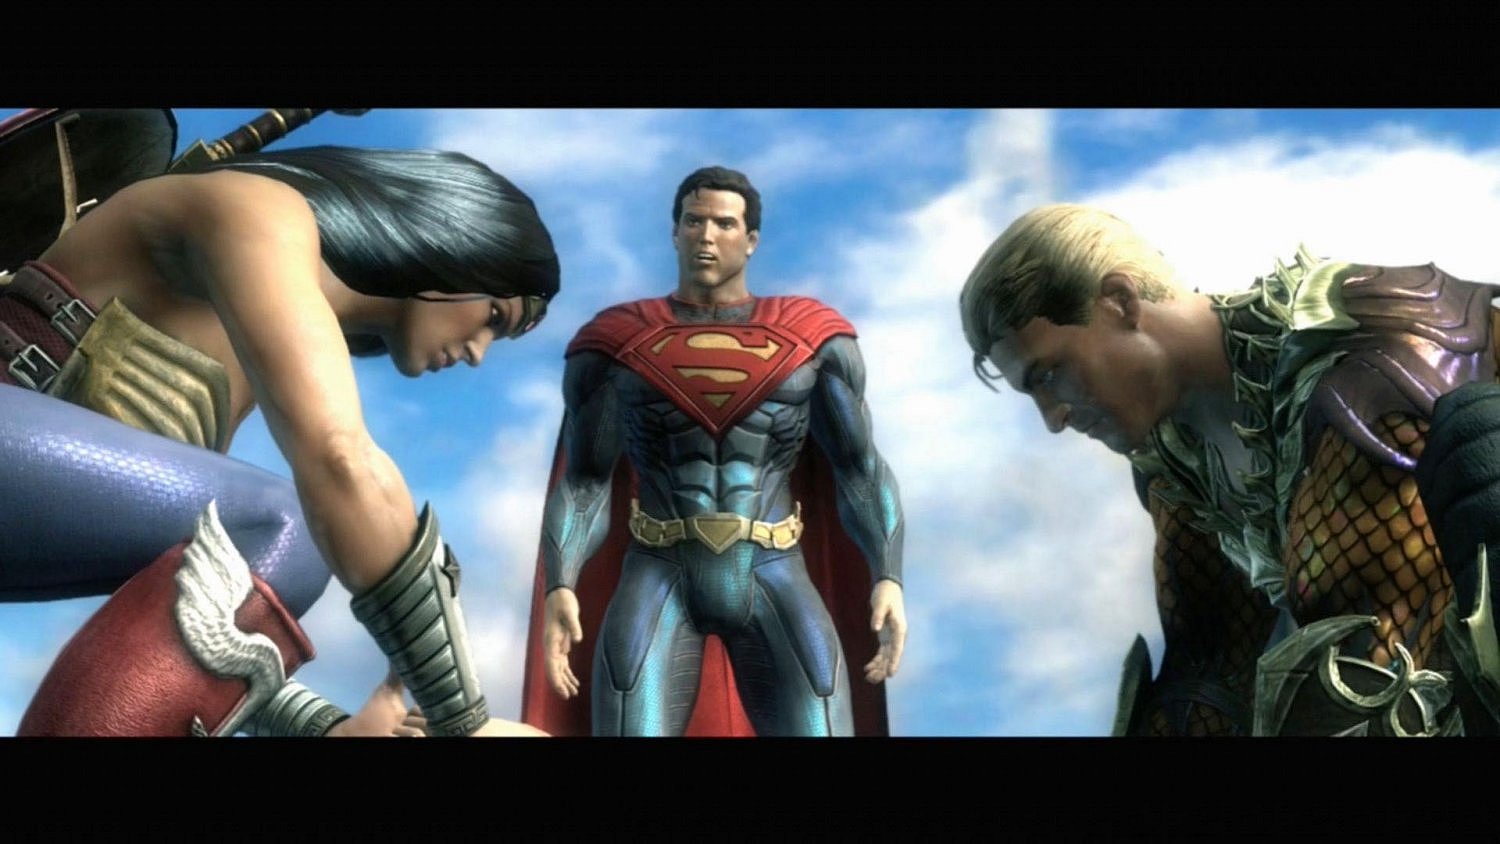 Injustice: Gods Among Us Ultimate Edition announced for